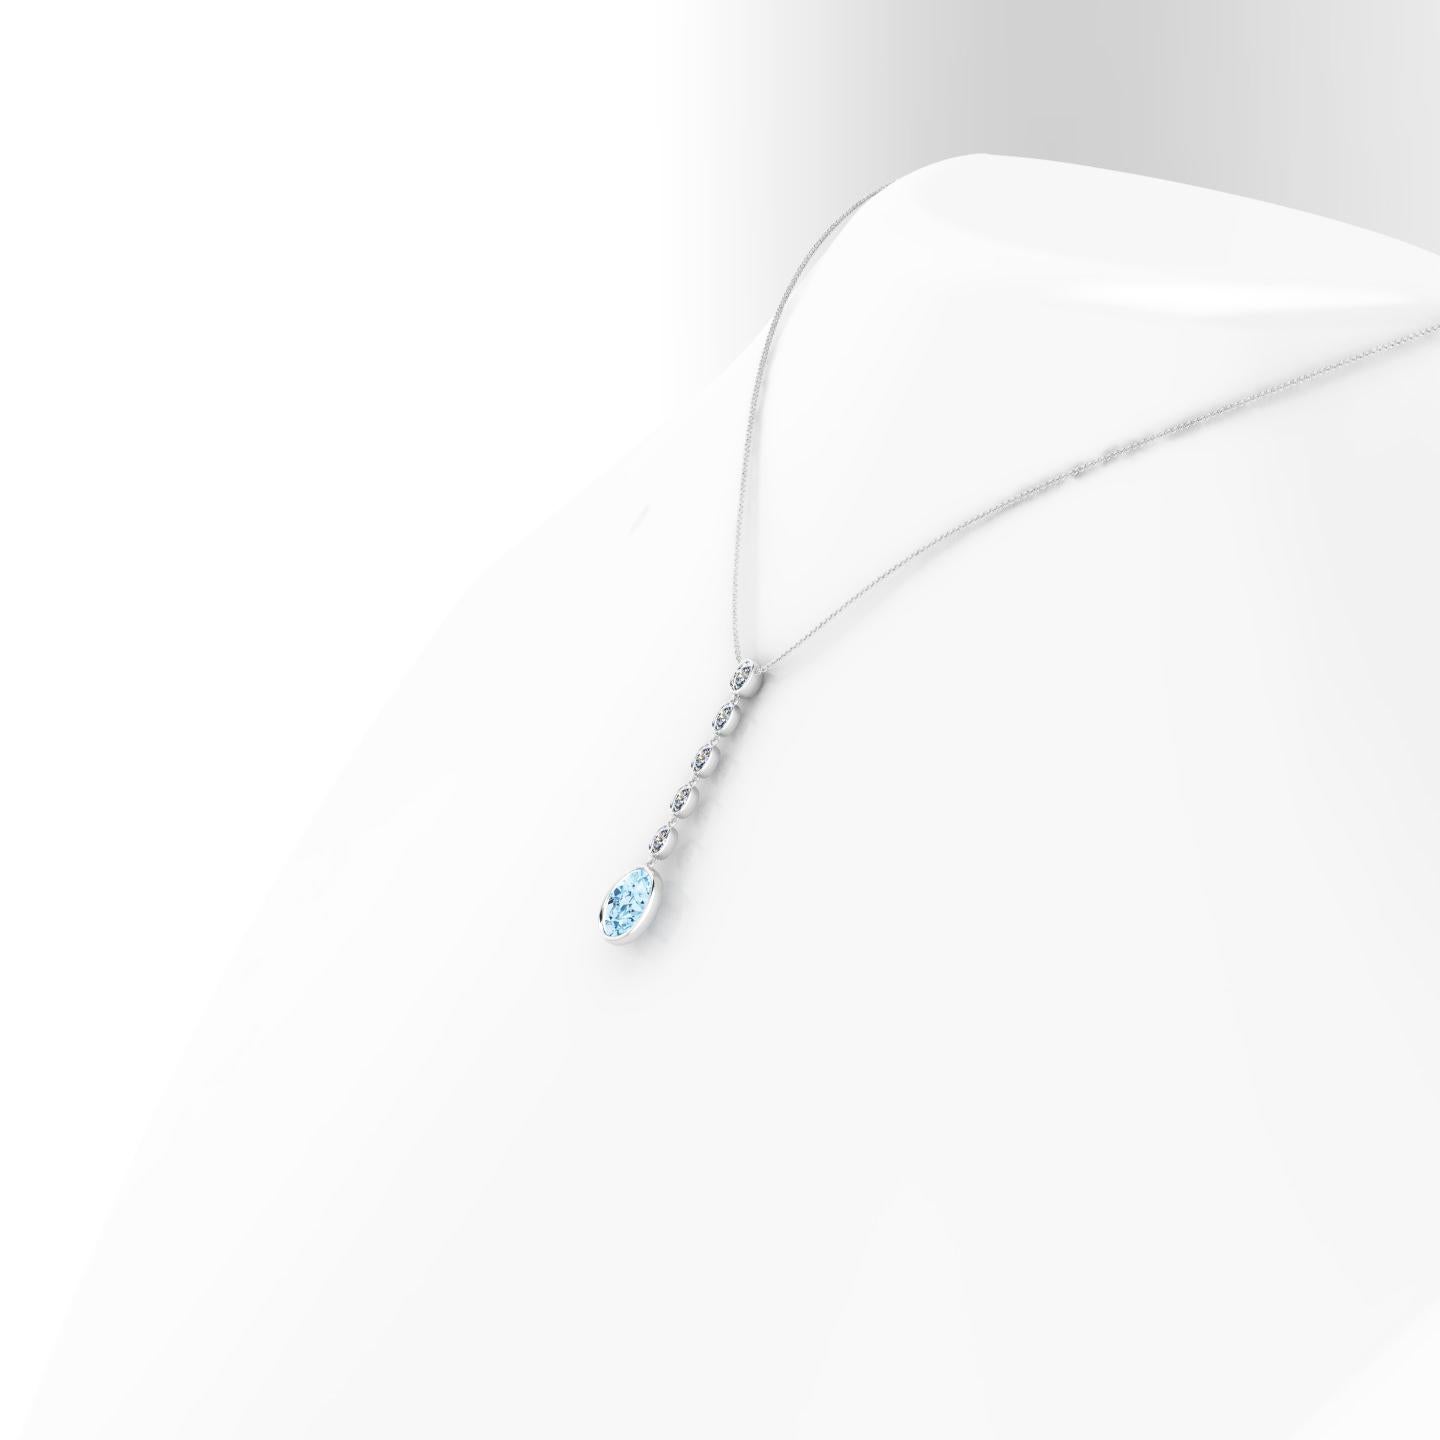 Approximate 2.32 carat Oval, natural Aquamarine, ethically sourced and mined in Brazil, and white, bright Oval cut diamonds for an approximate 0.55 carat weight, set in thin, minimalist bezels in 18k white gold, to enhance the light of the stones